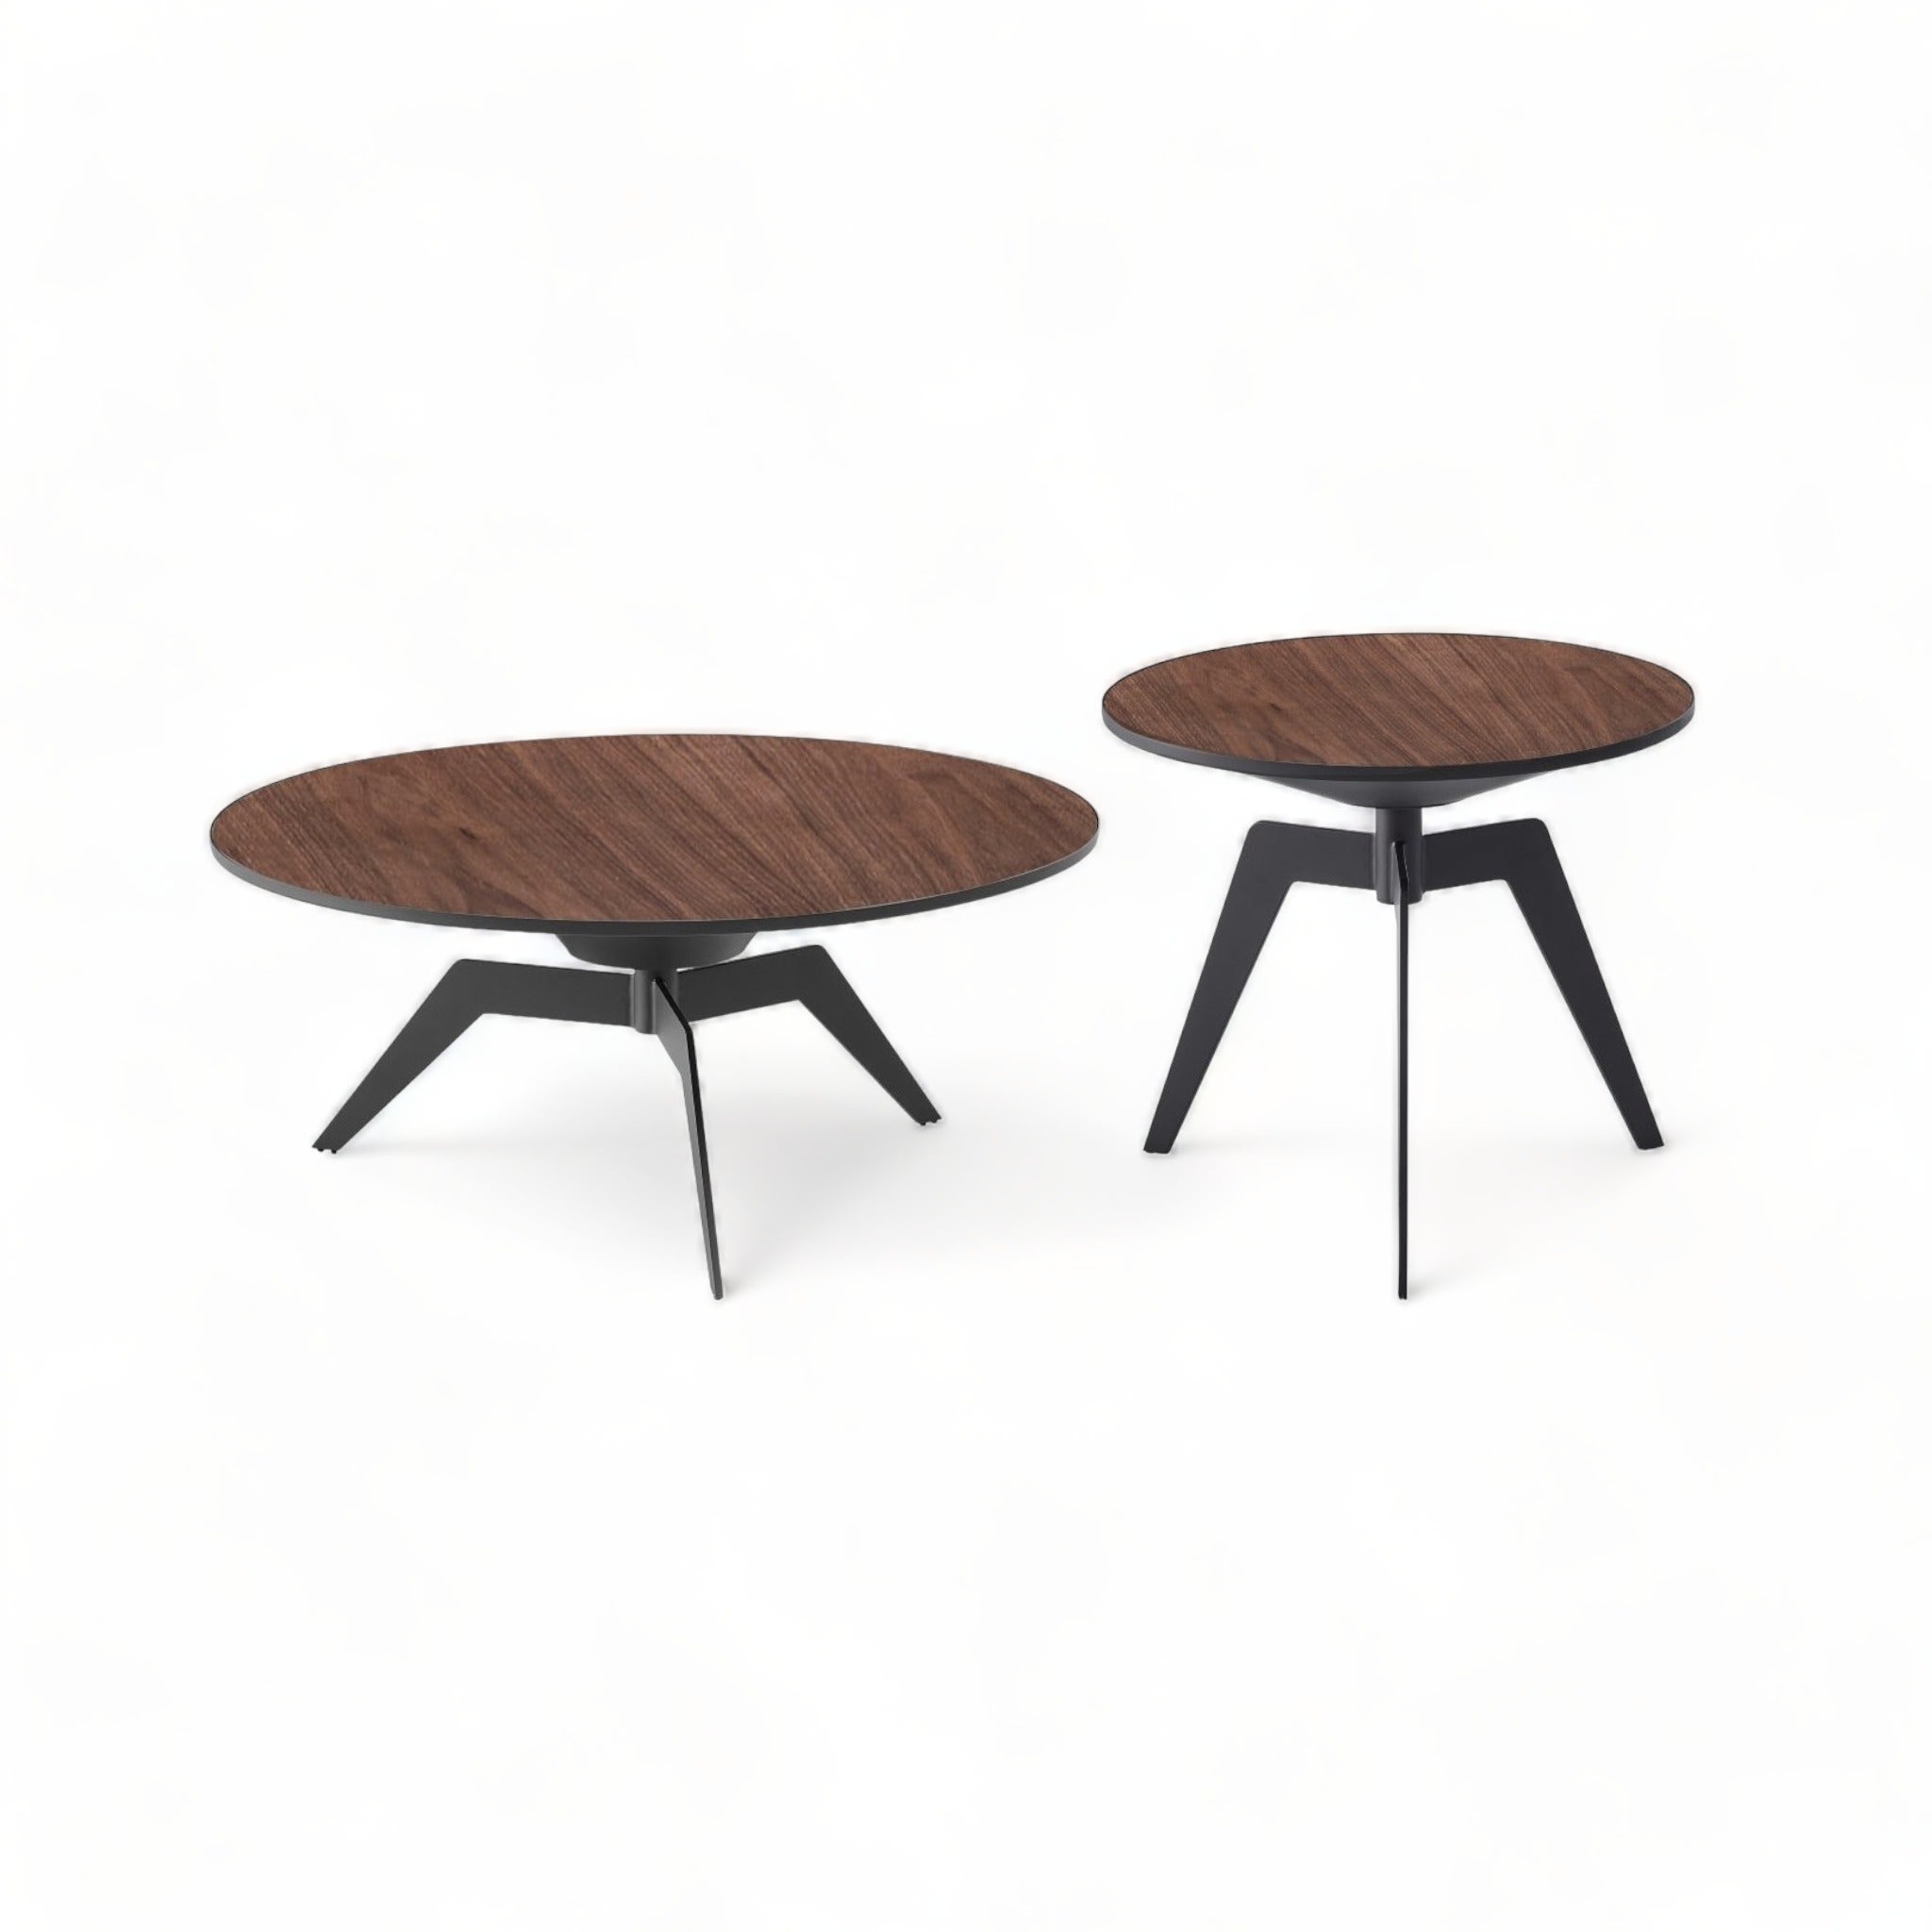 Grotte Round Side Table